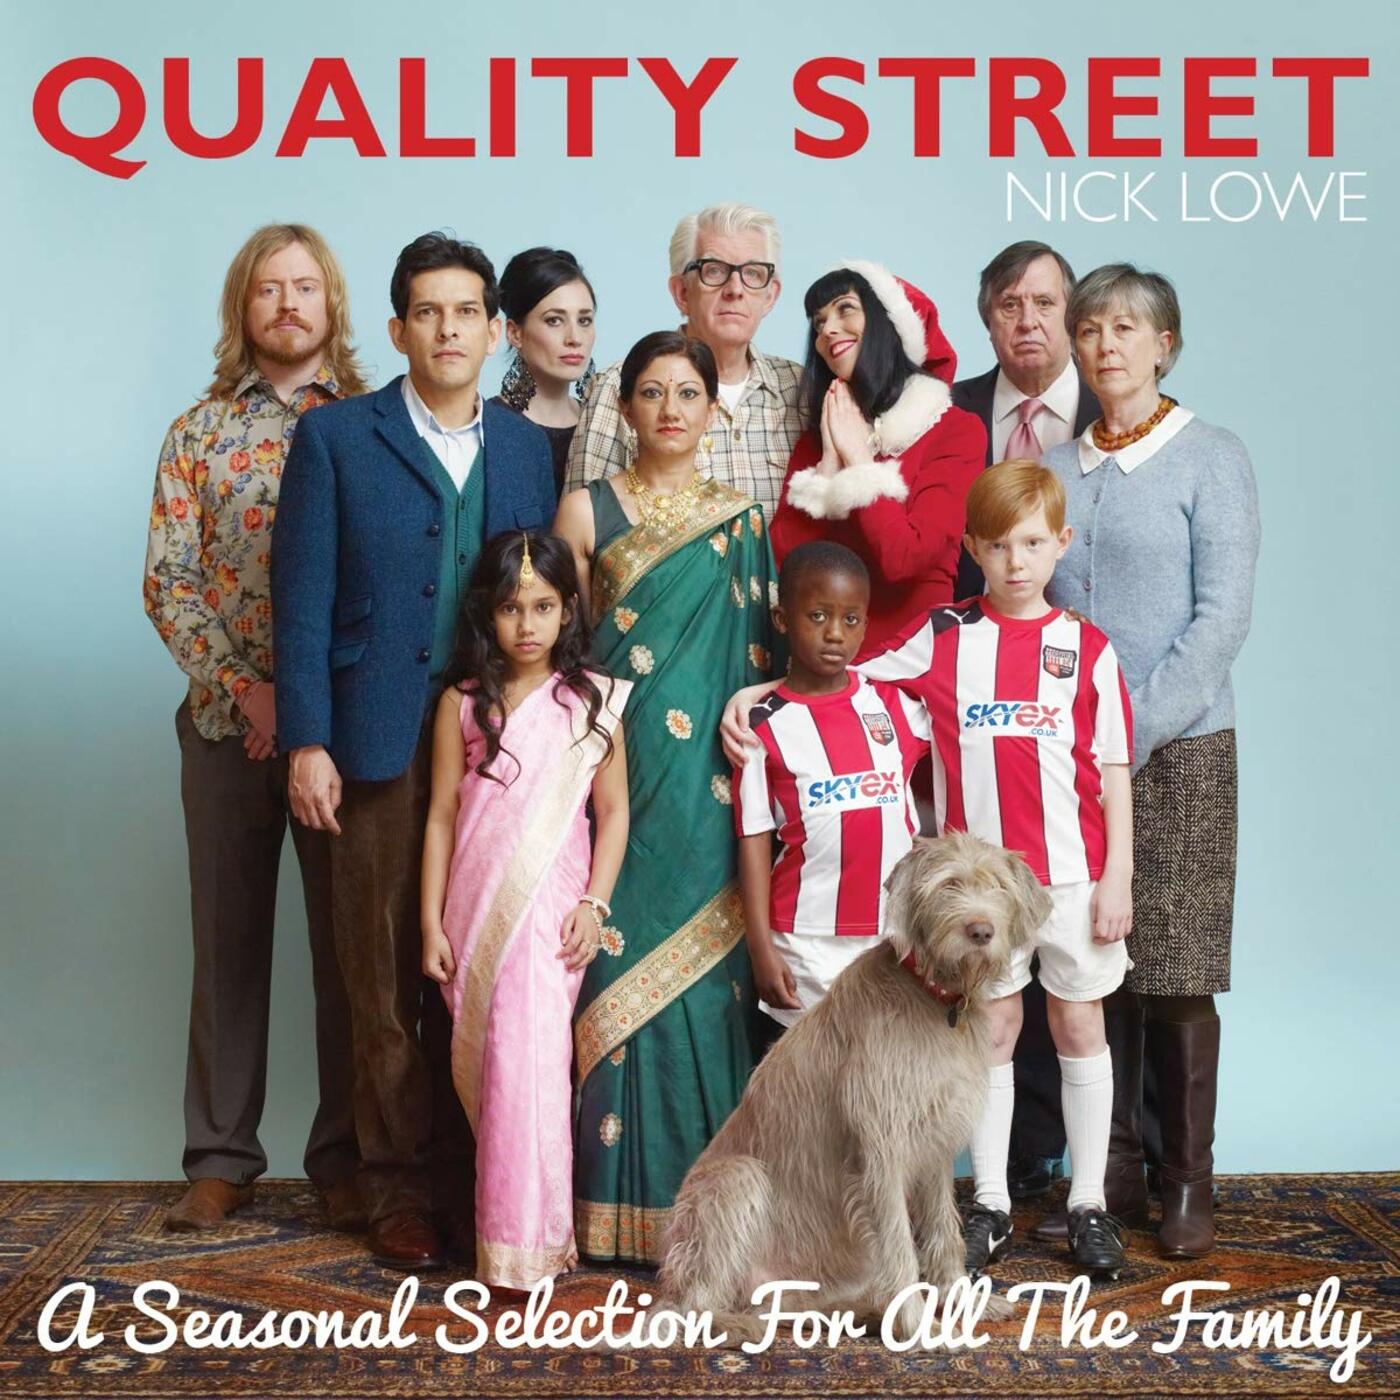 Nick Lowe | Quality Street: A Seasonal Selection For The Whole Family | Vinyl